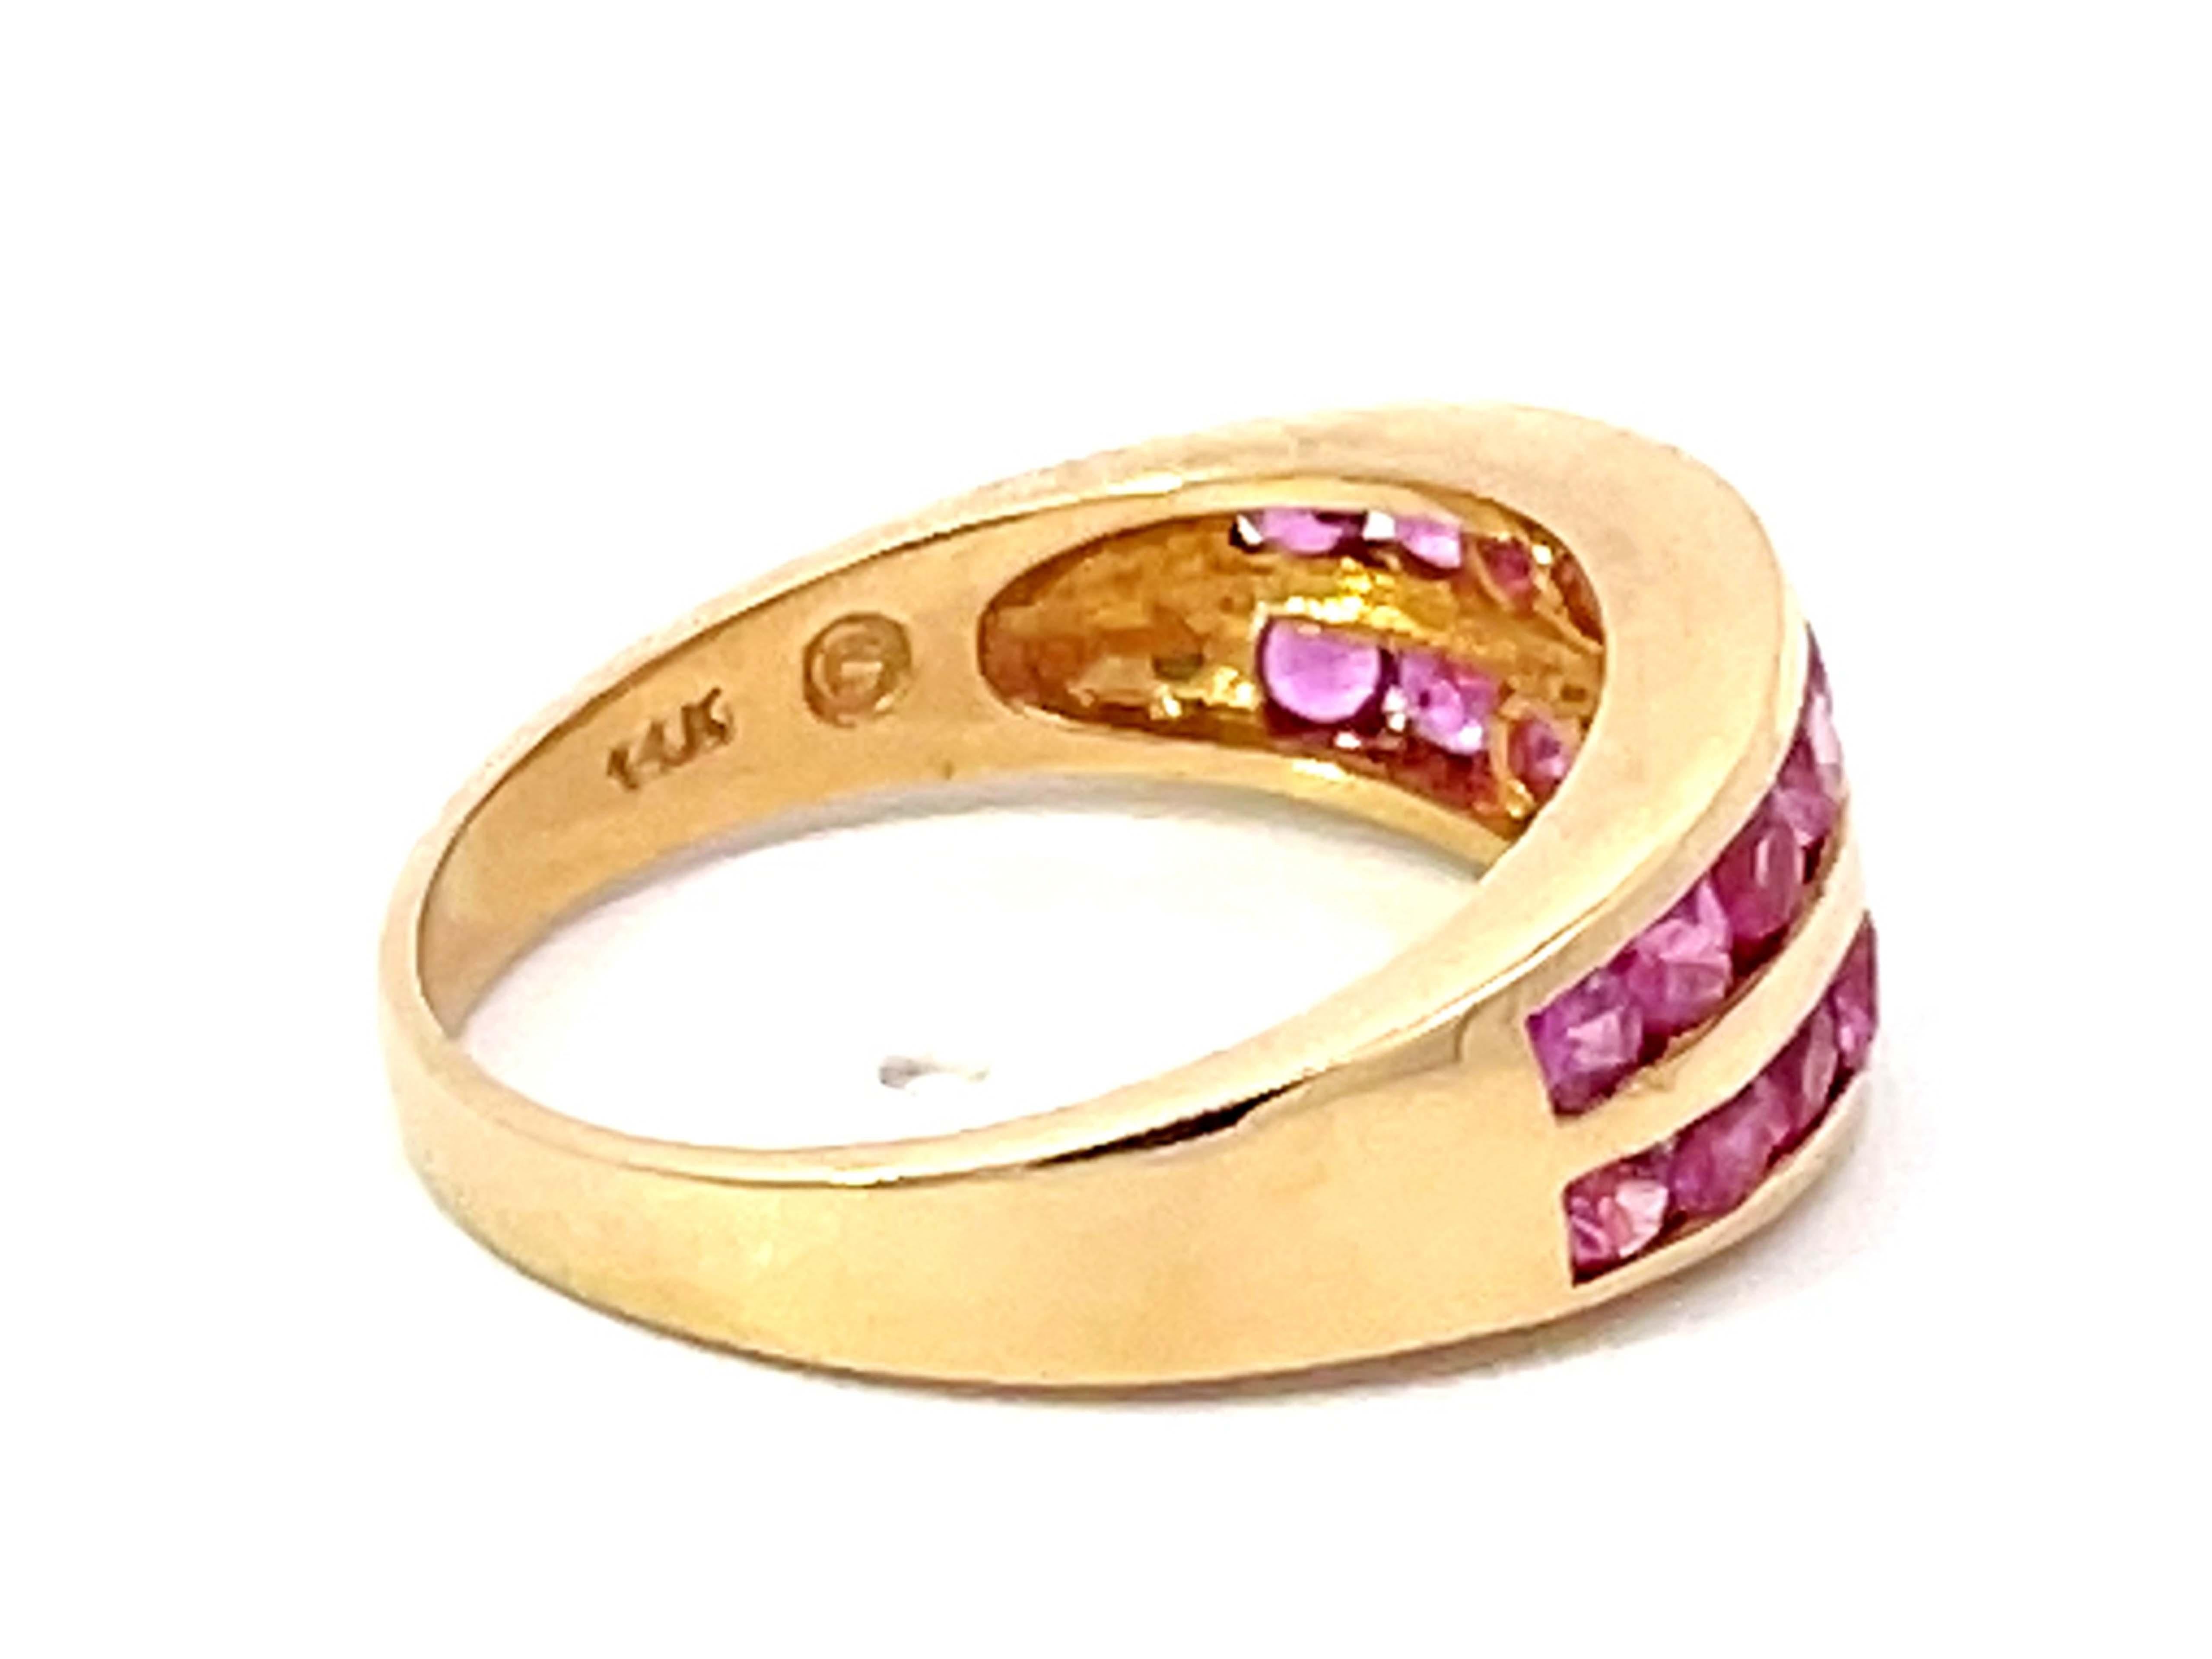 Pink Sapphire Channel Set 14k Yellow Gold Ring In Excellent Condition For Sale In Honolulu, HI